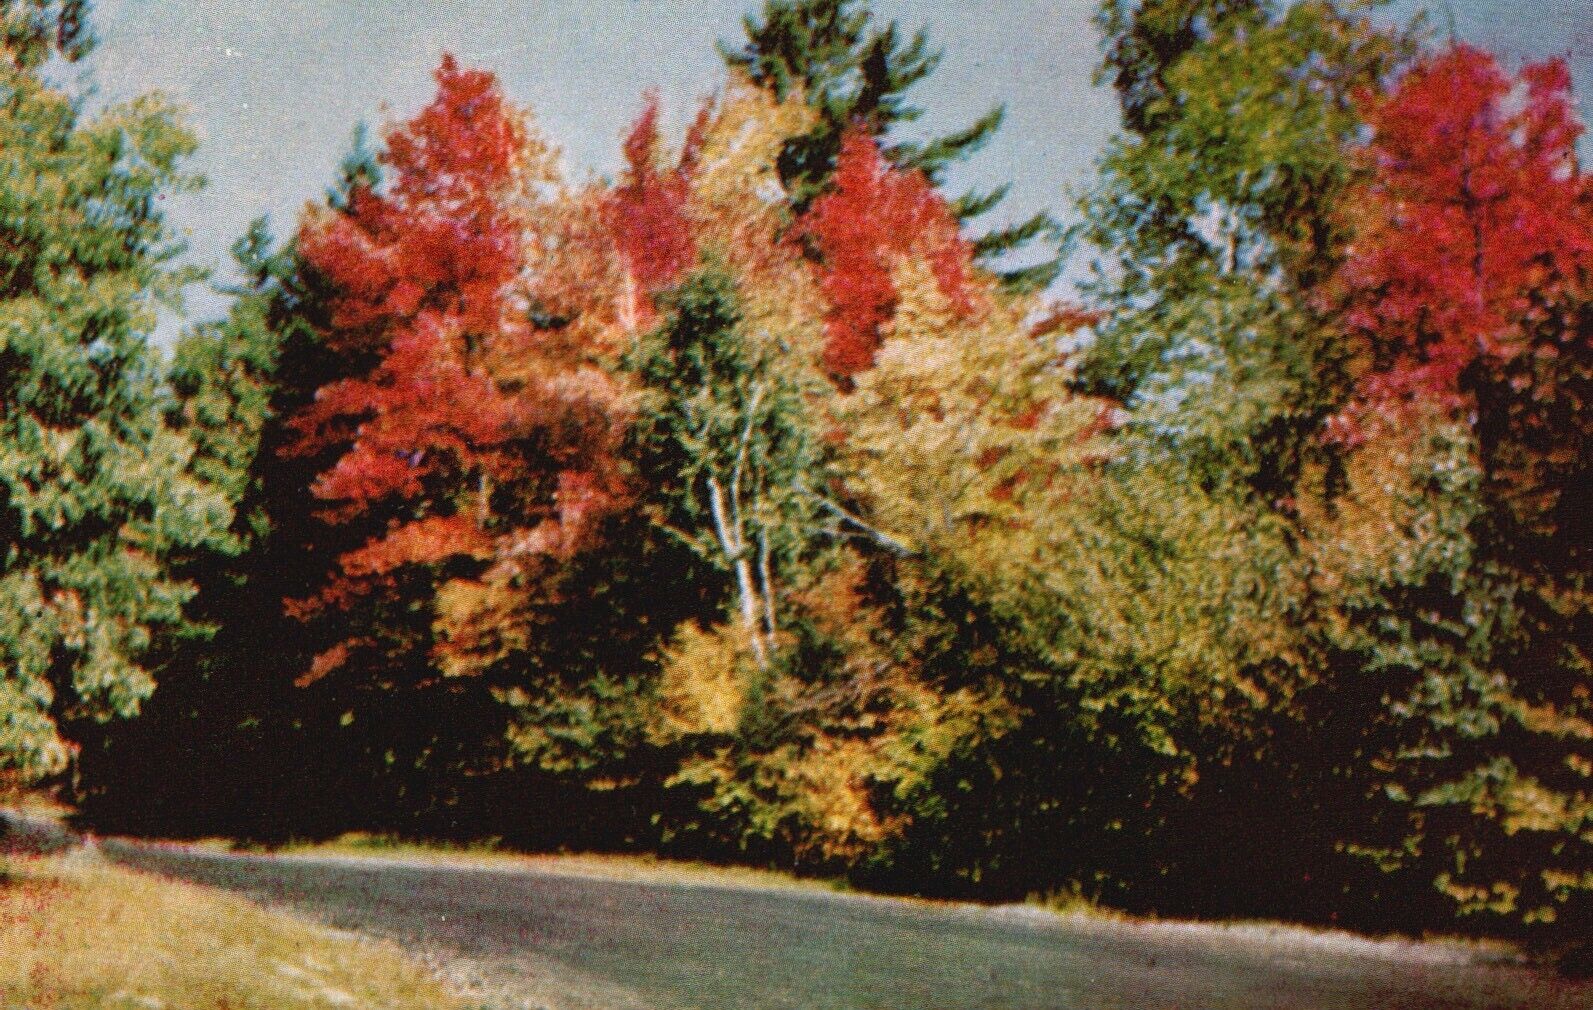 Postcard WV Greetings from Chester Fall Foliage Posted Chrome Vintage PC G2041